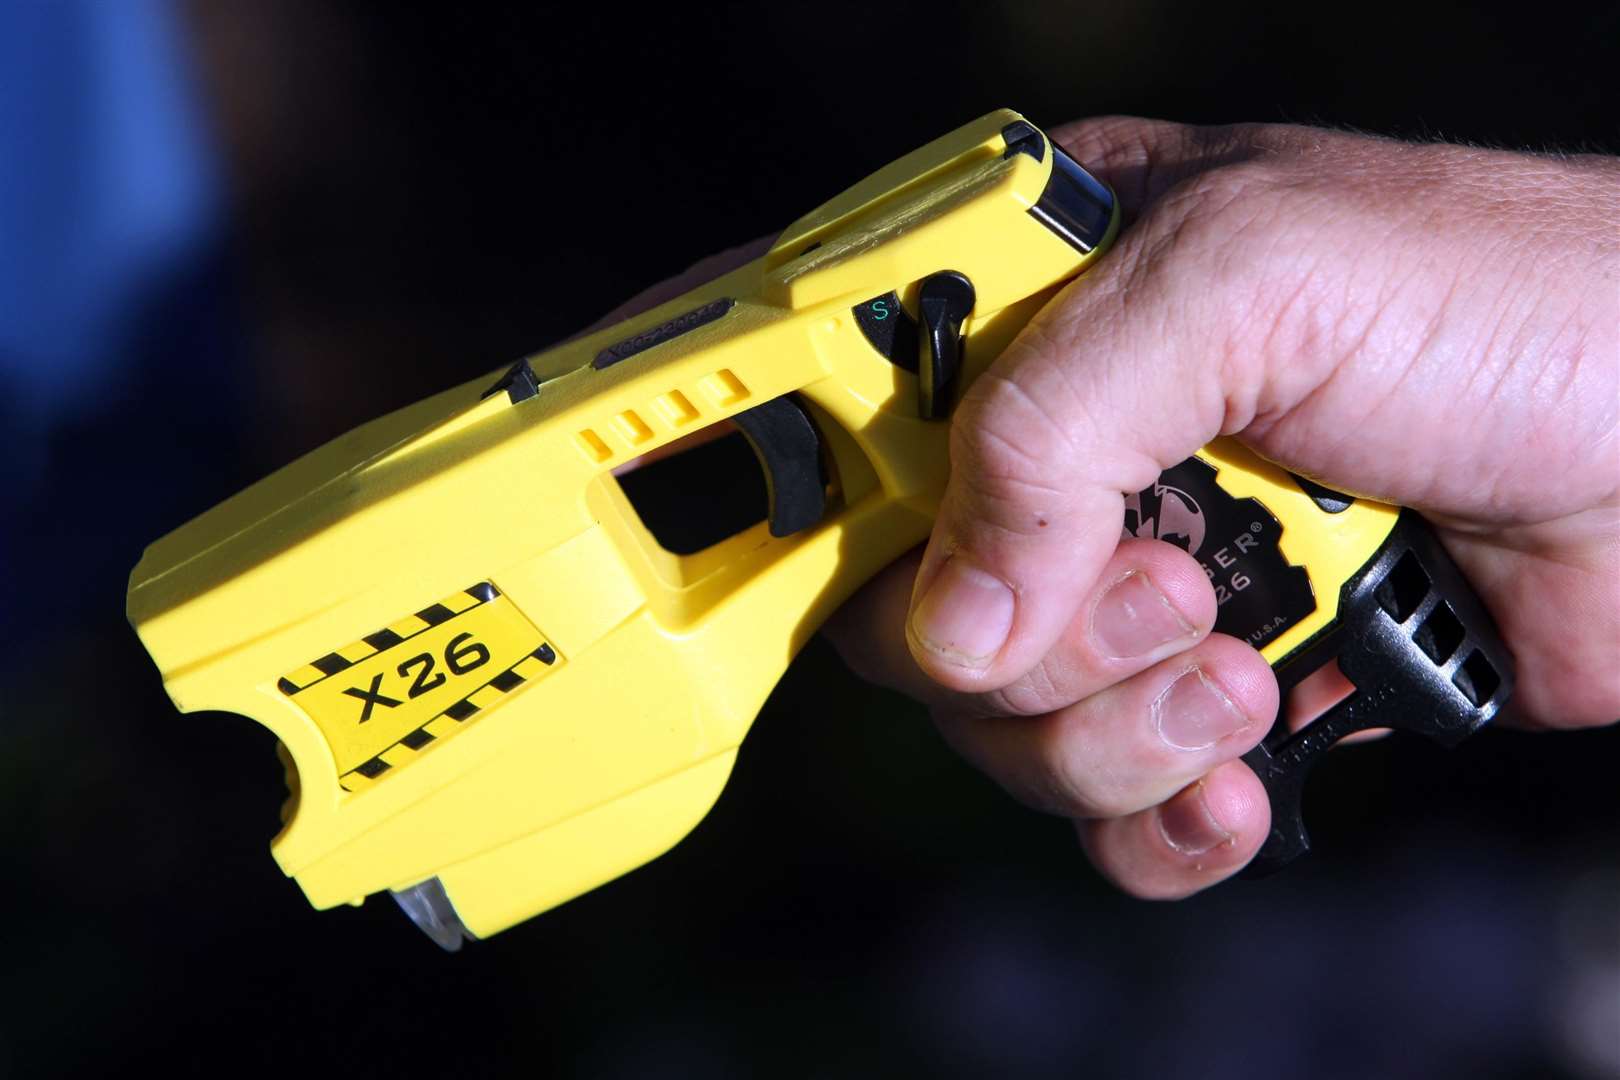 Police drew Taser guns but did not need to use them